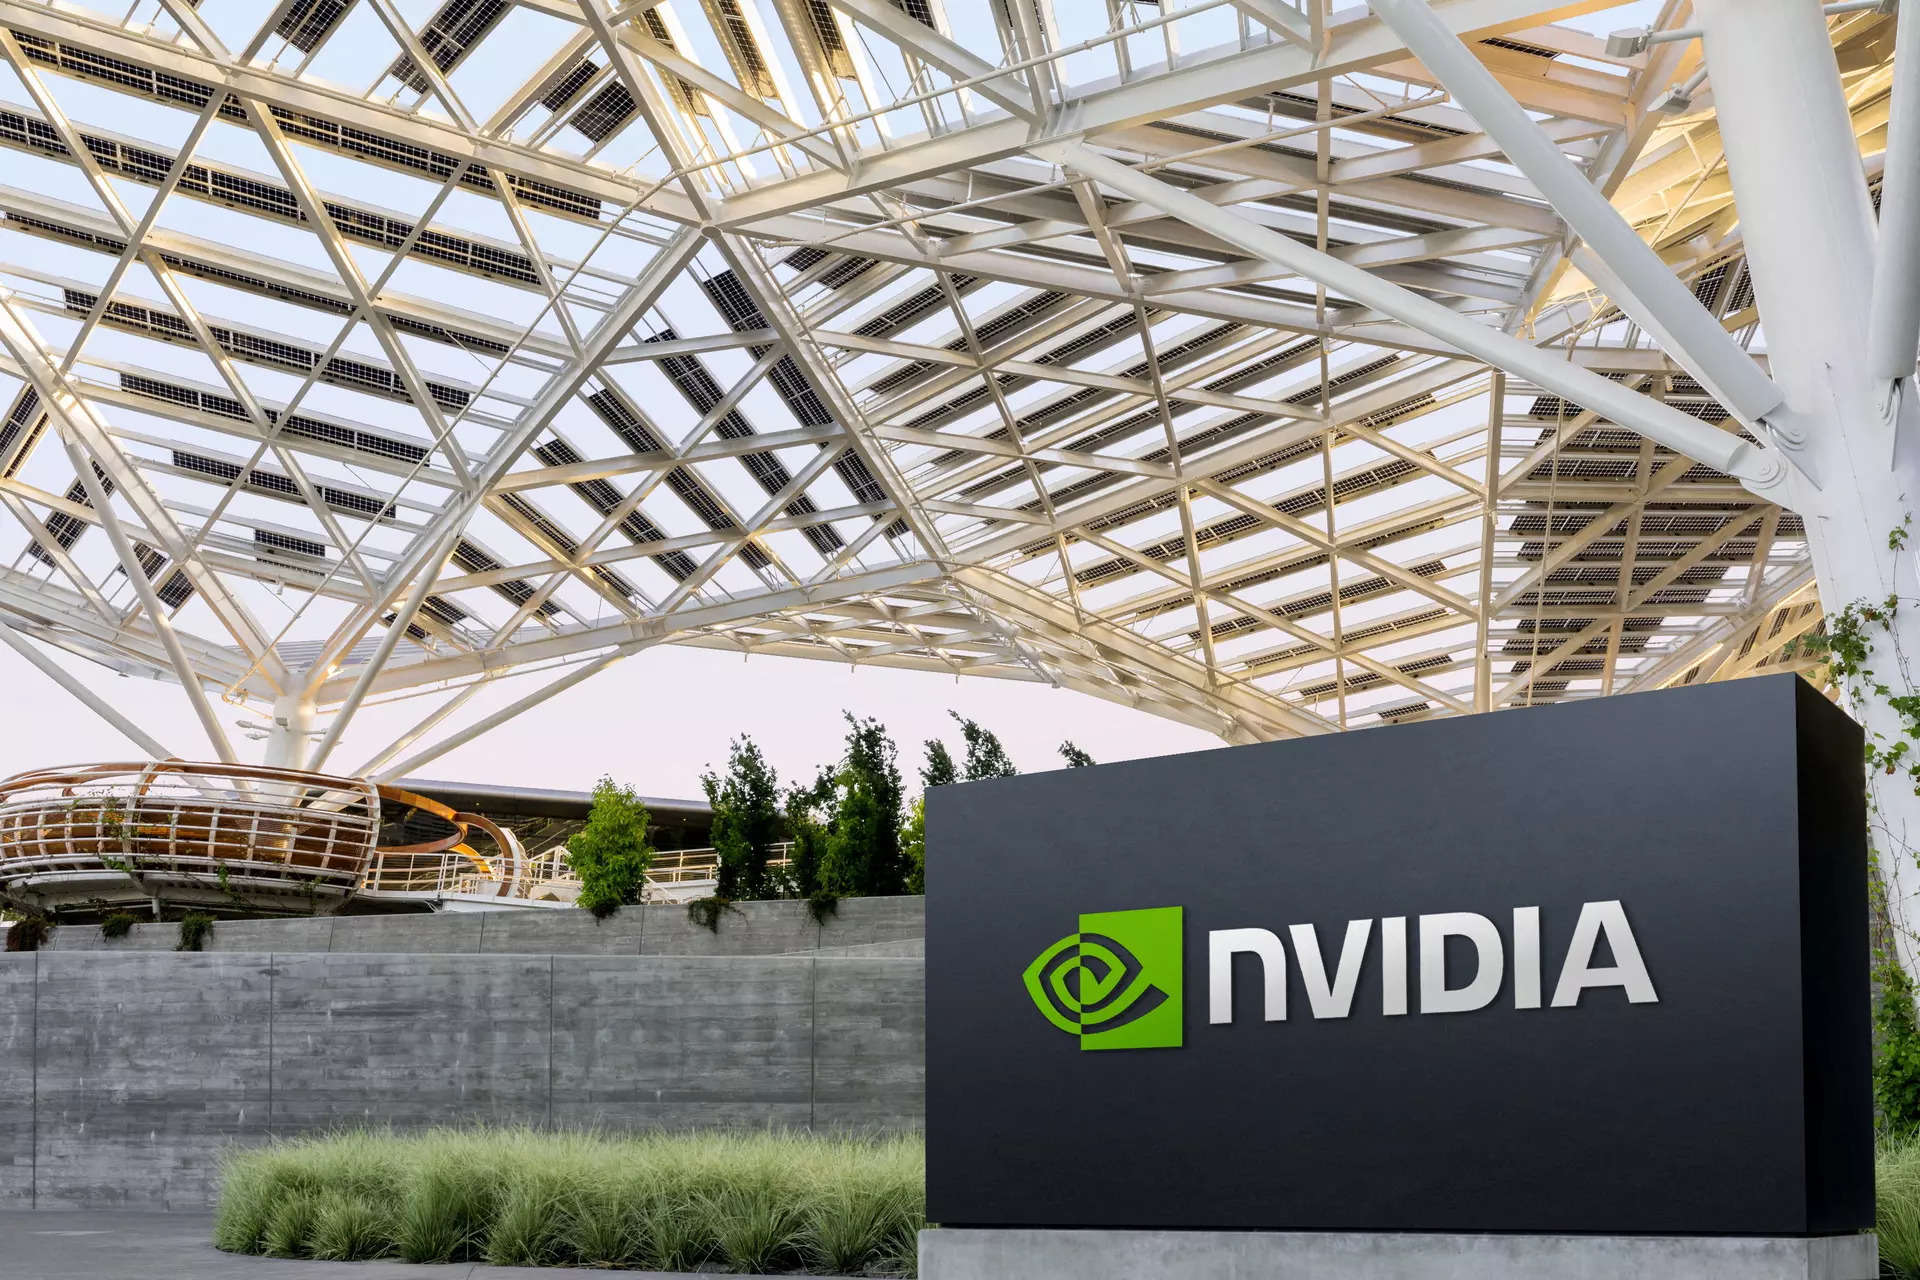 Amazon racing to develop AI chips cheaper, faster than Nvidia's, executives say 